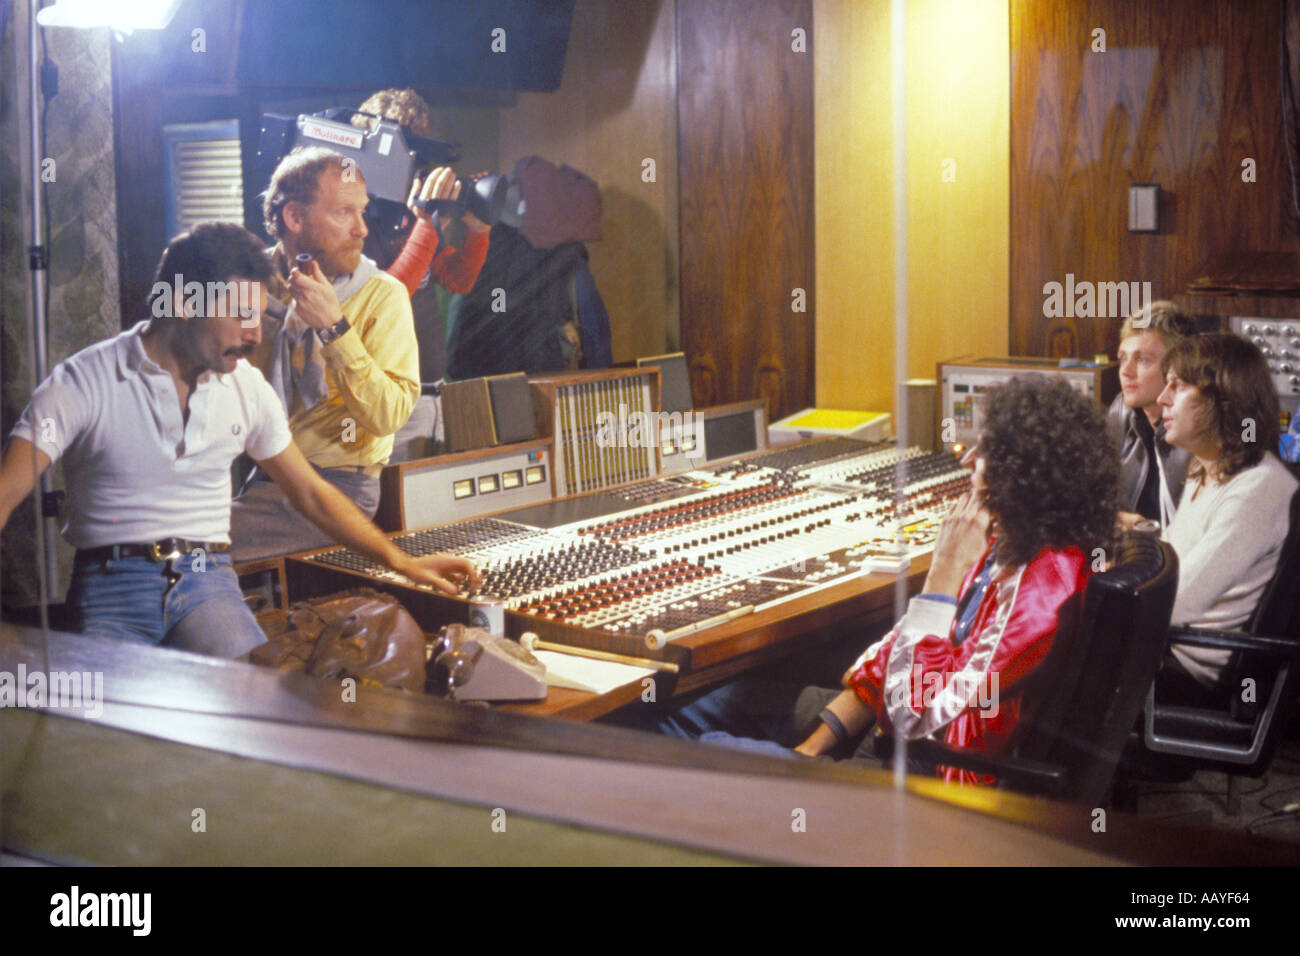 Freddie Mercury lead singer rock group Queen in control room 22 October 1980 with Brian May and others from the group PER0029 Stock Photo